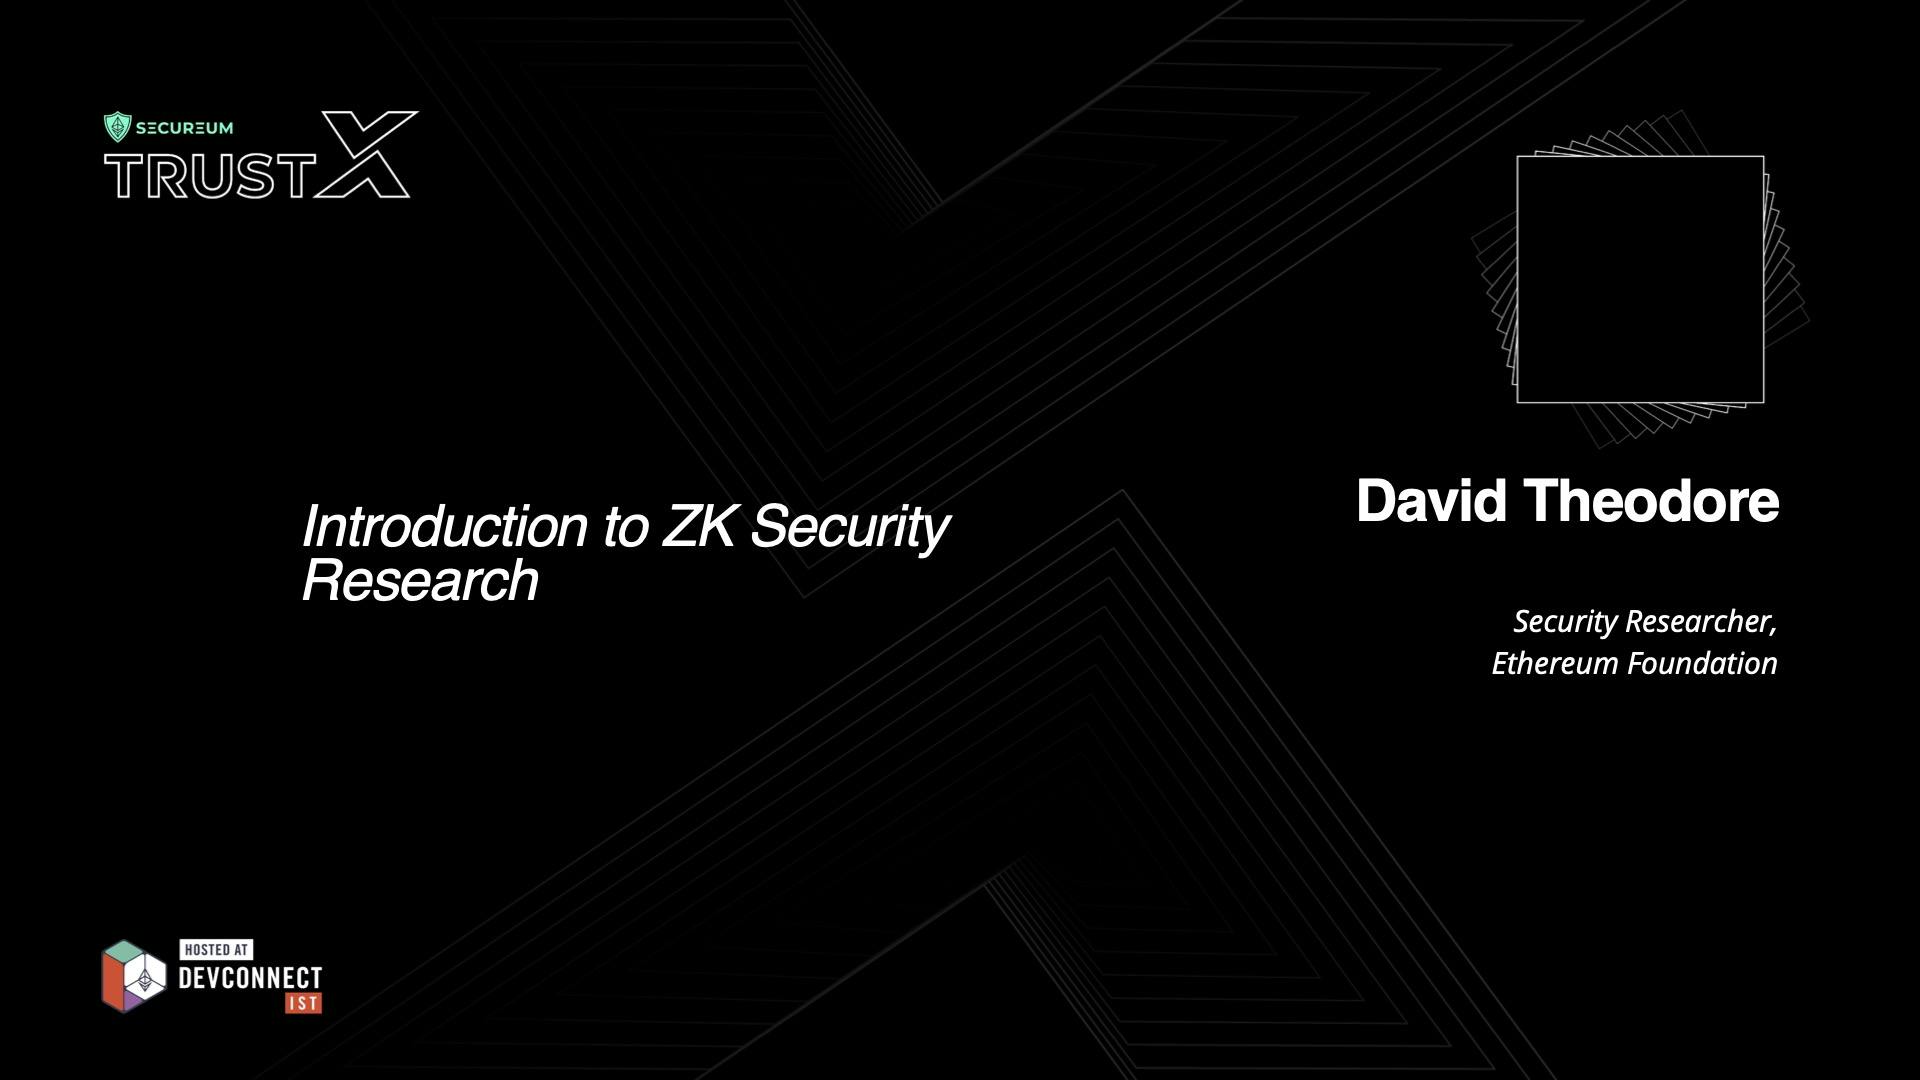 Introduction to ZK Security Research